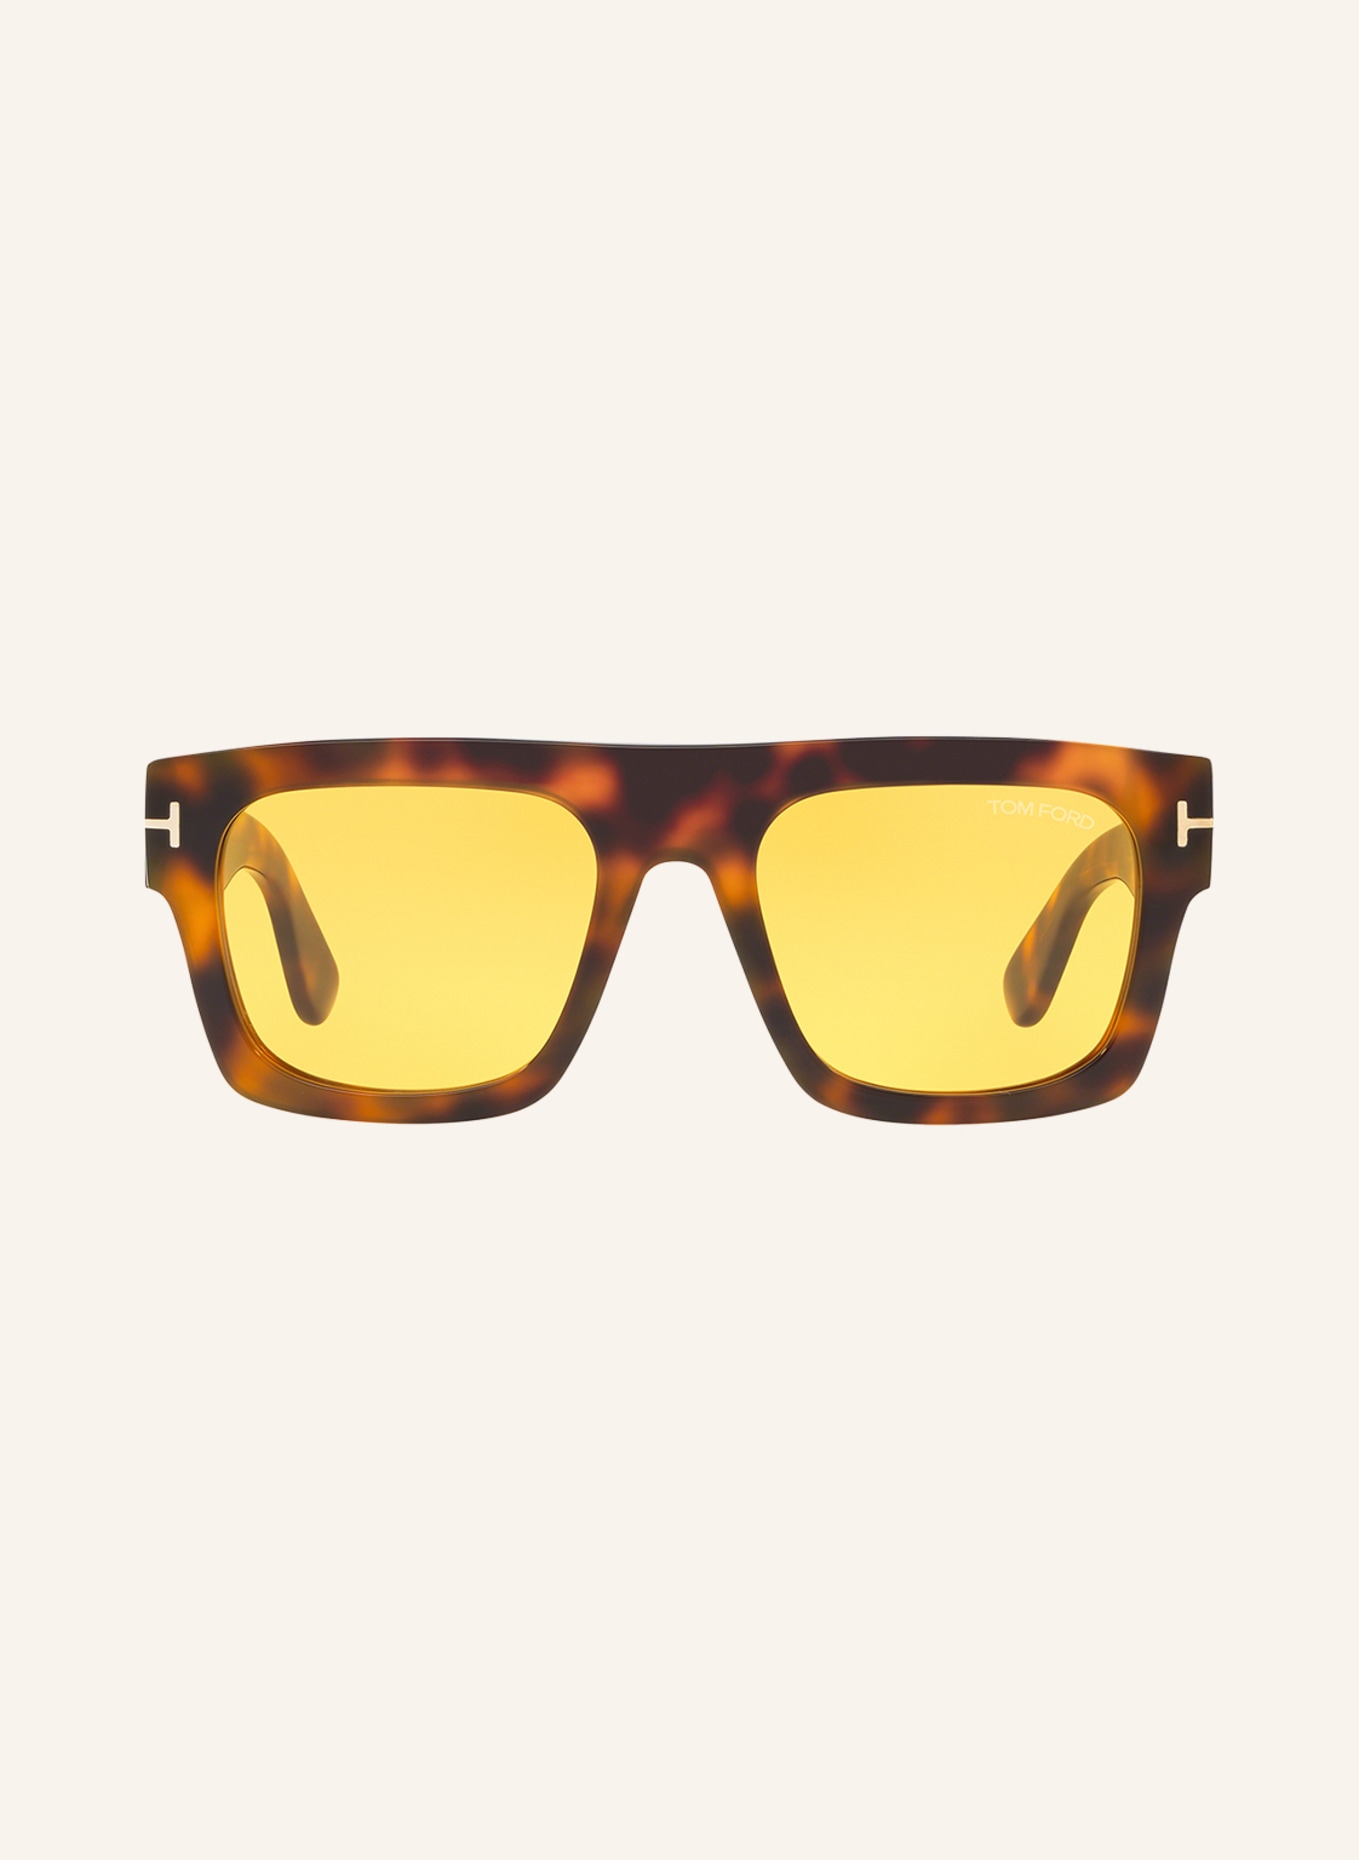 TOM FORD Sunglasses FT0711 FAUSTO, Color: 4402D1 - HAVANA/YELLOW (Image 2)